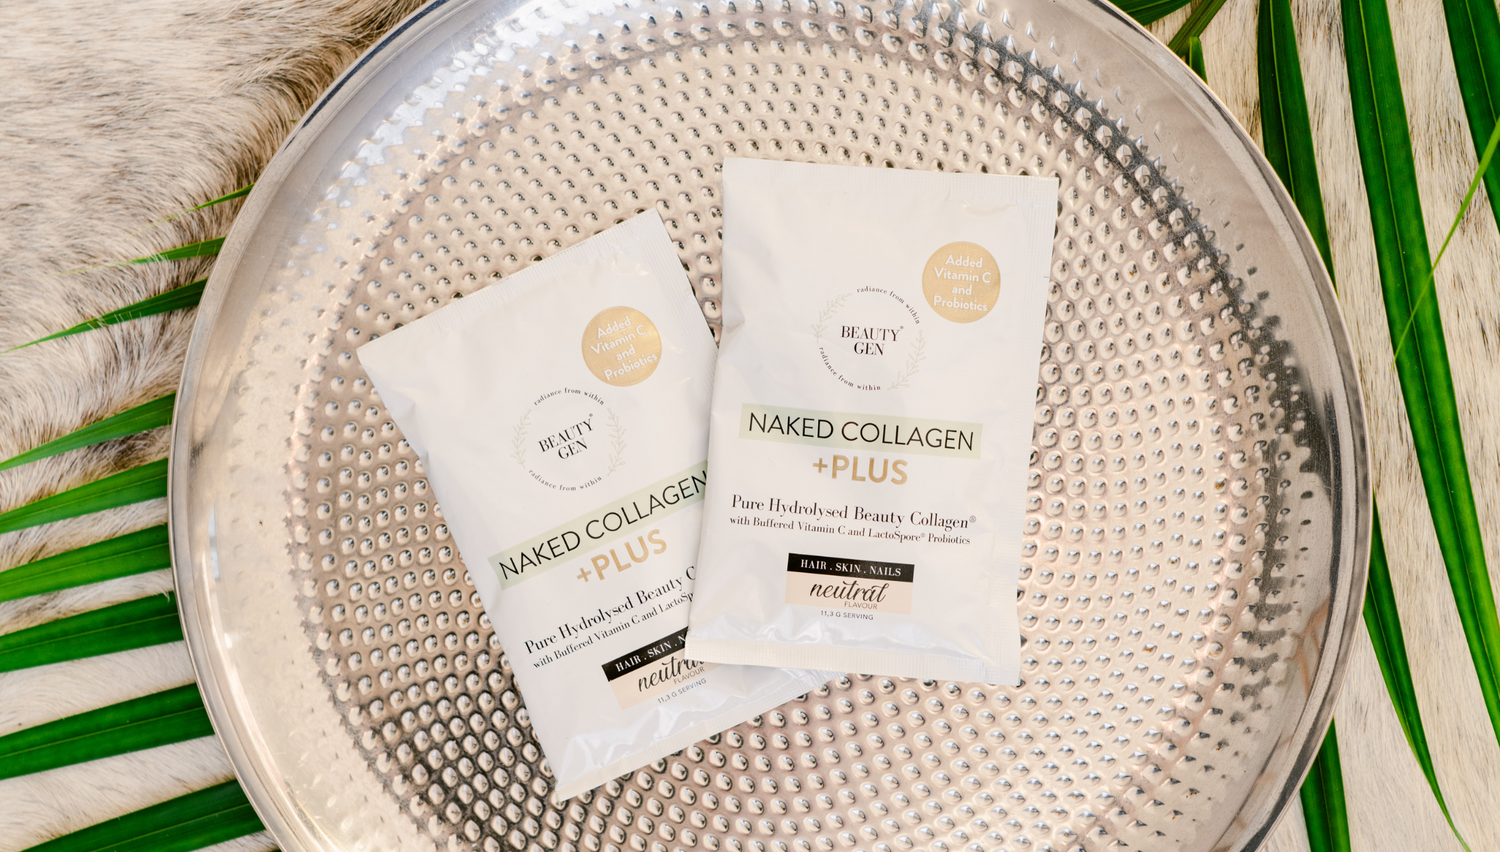 Naked Collagen Plus